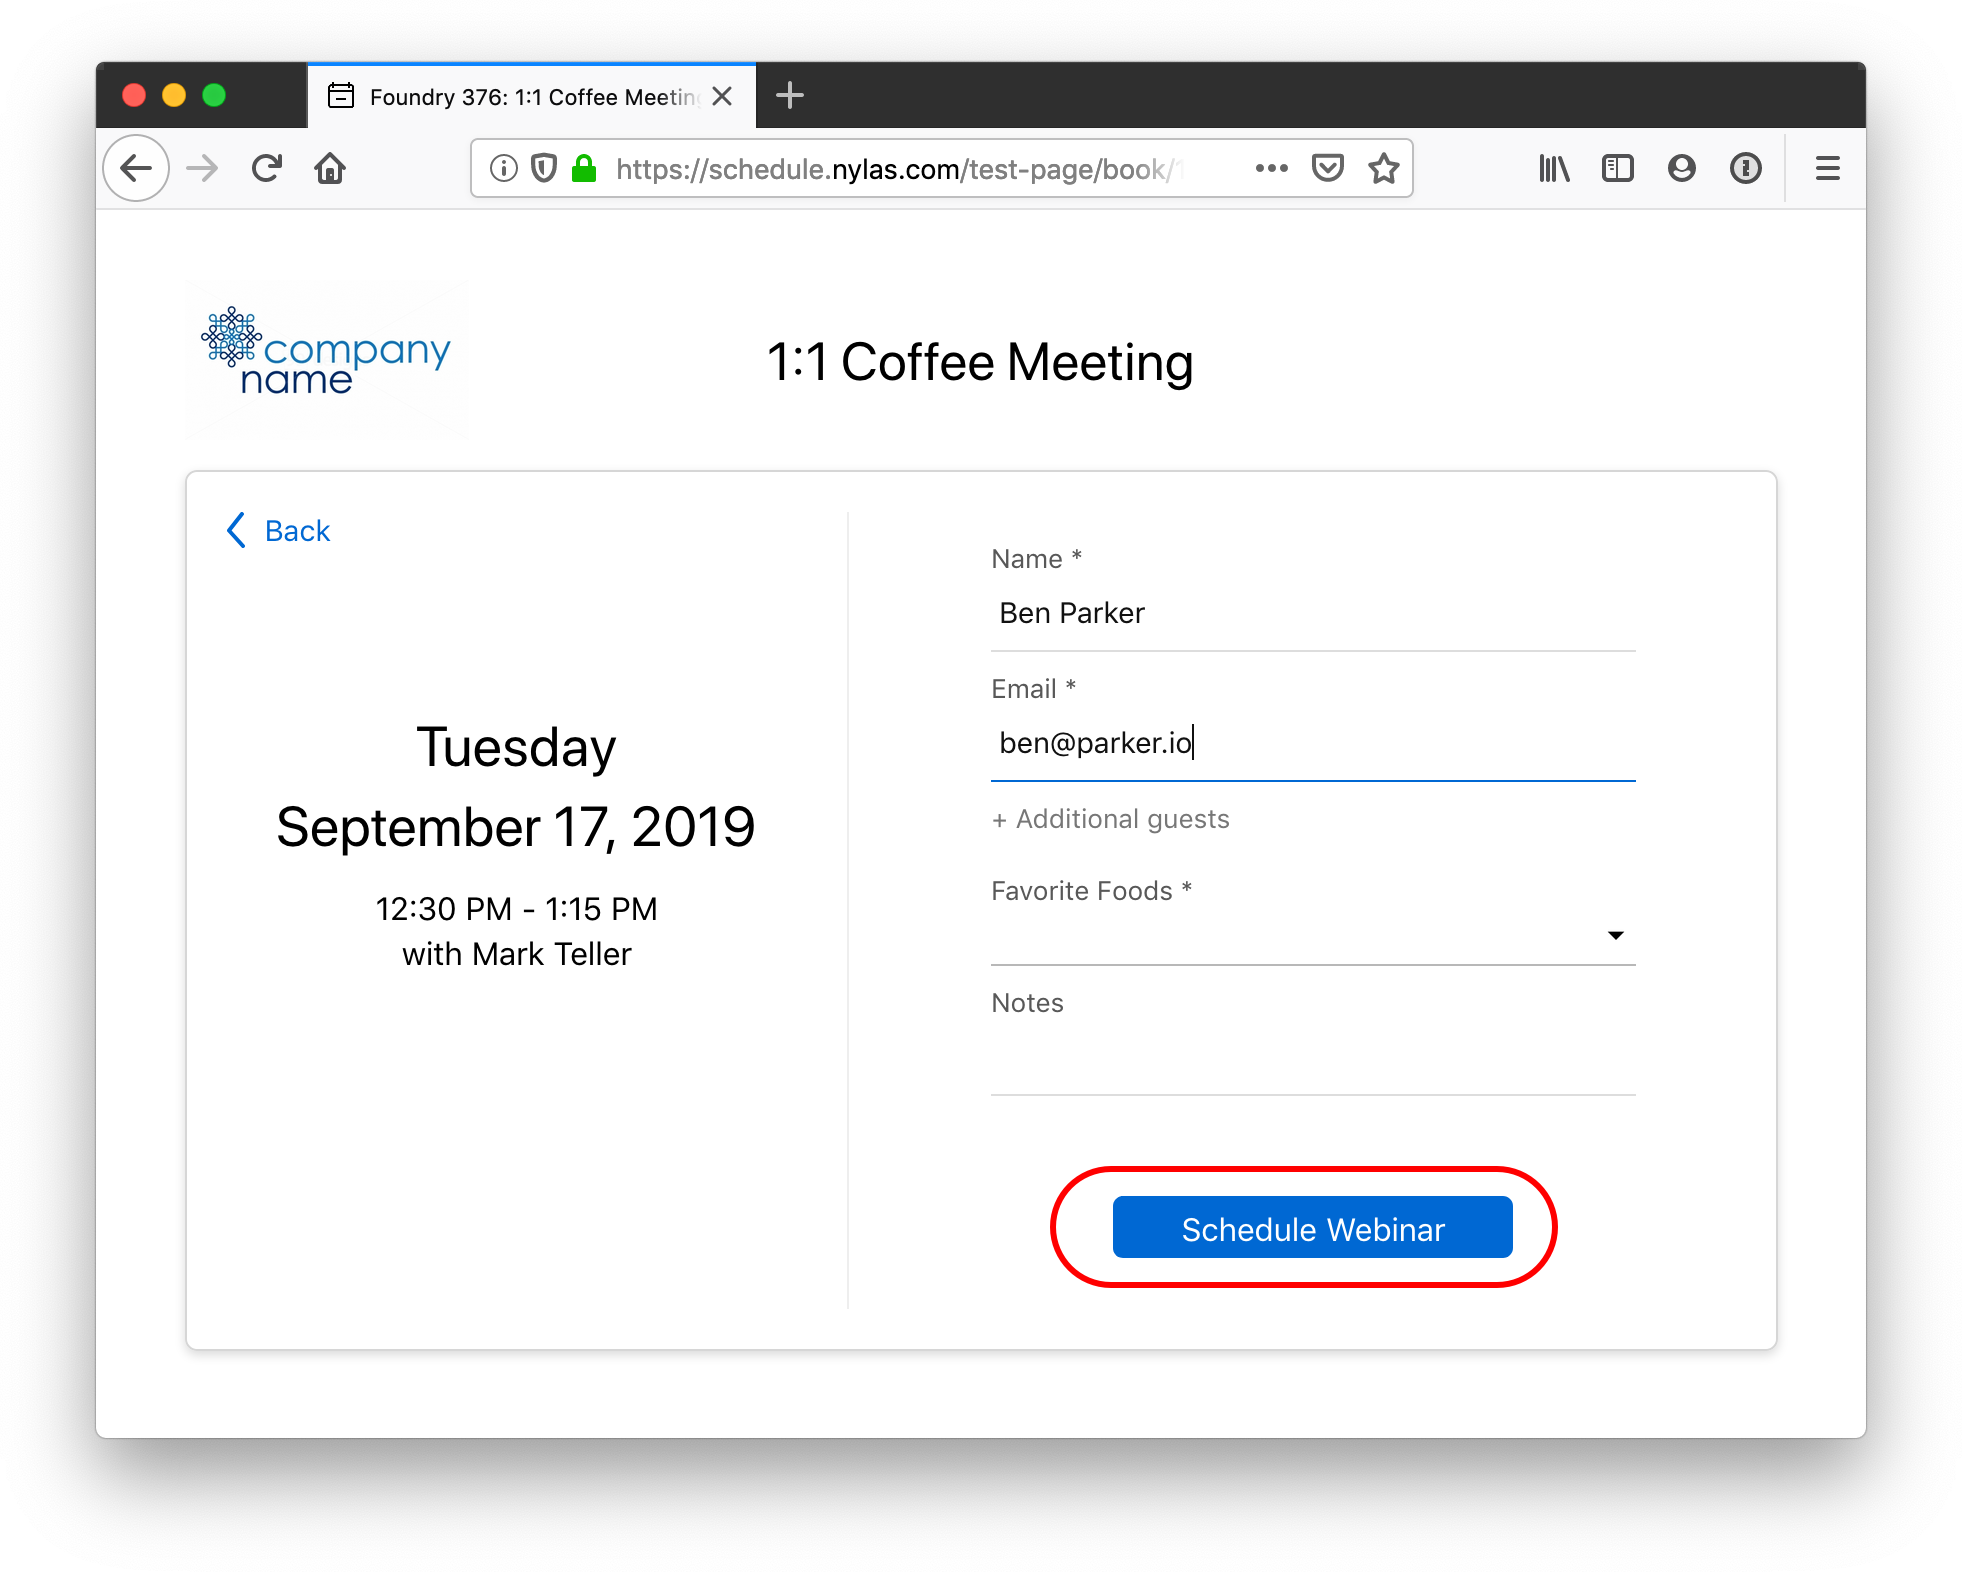 The Nylas Scheduler showing the details of a one-on-one coffee chat. The participant information fields are filled in with demo information. The custom "Schedule webinar" button is circled in red.